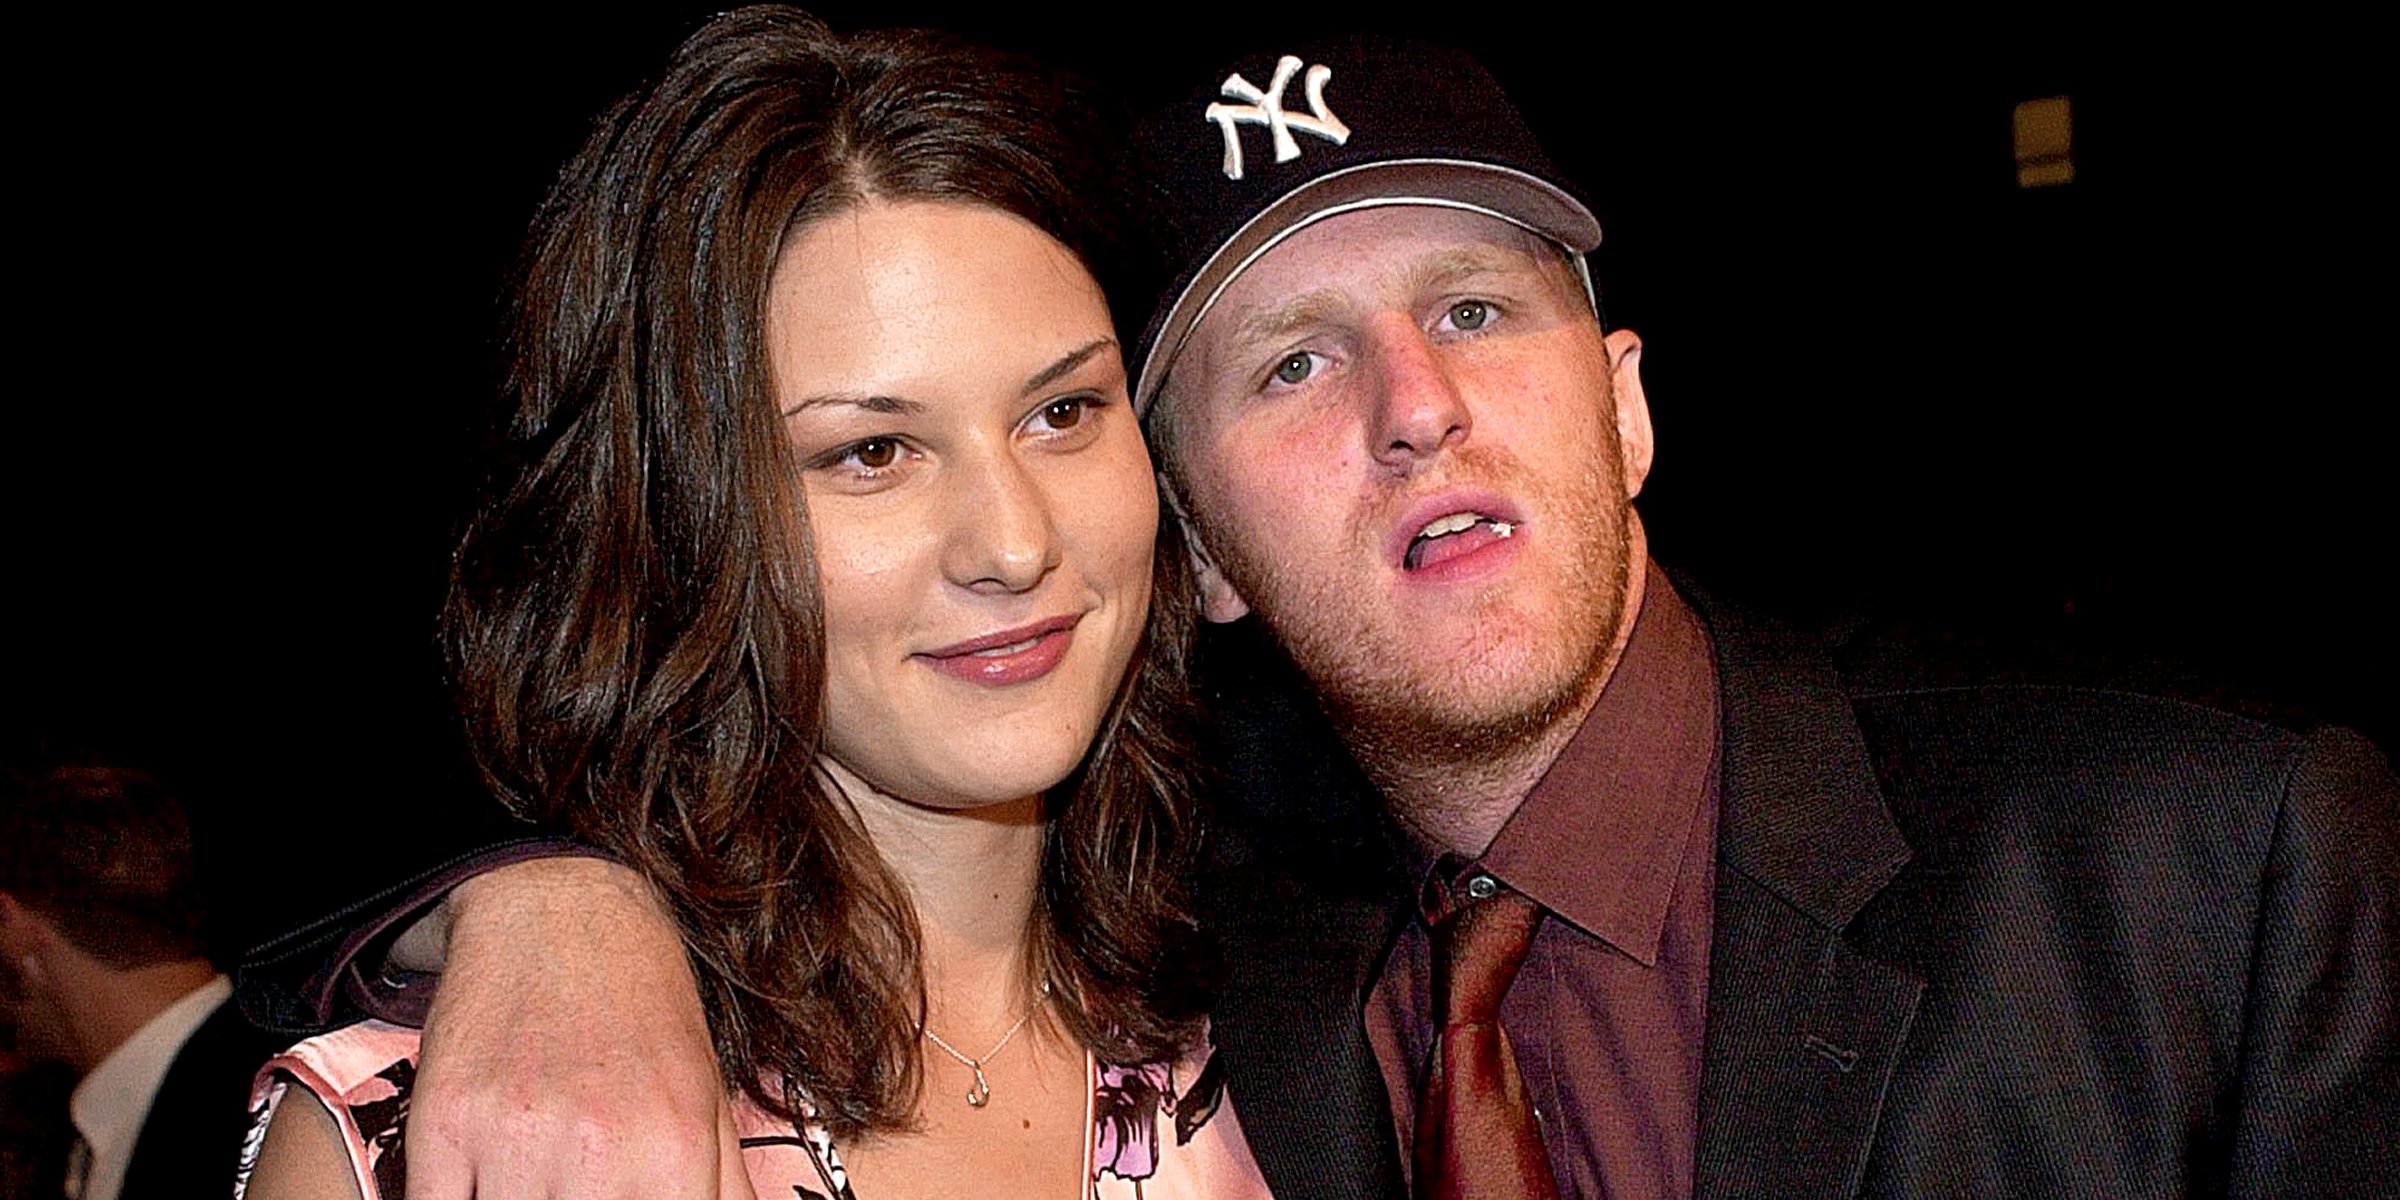 Michael Rapaport and Nichole Beattie. | Source: Getty Images